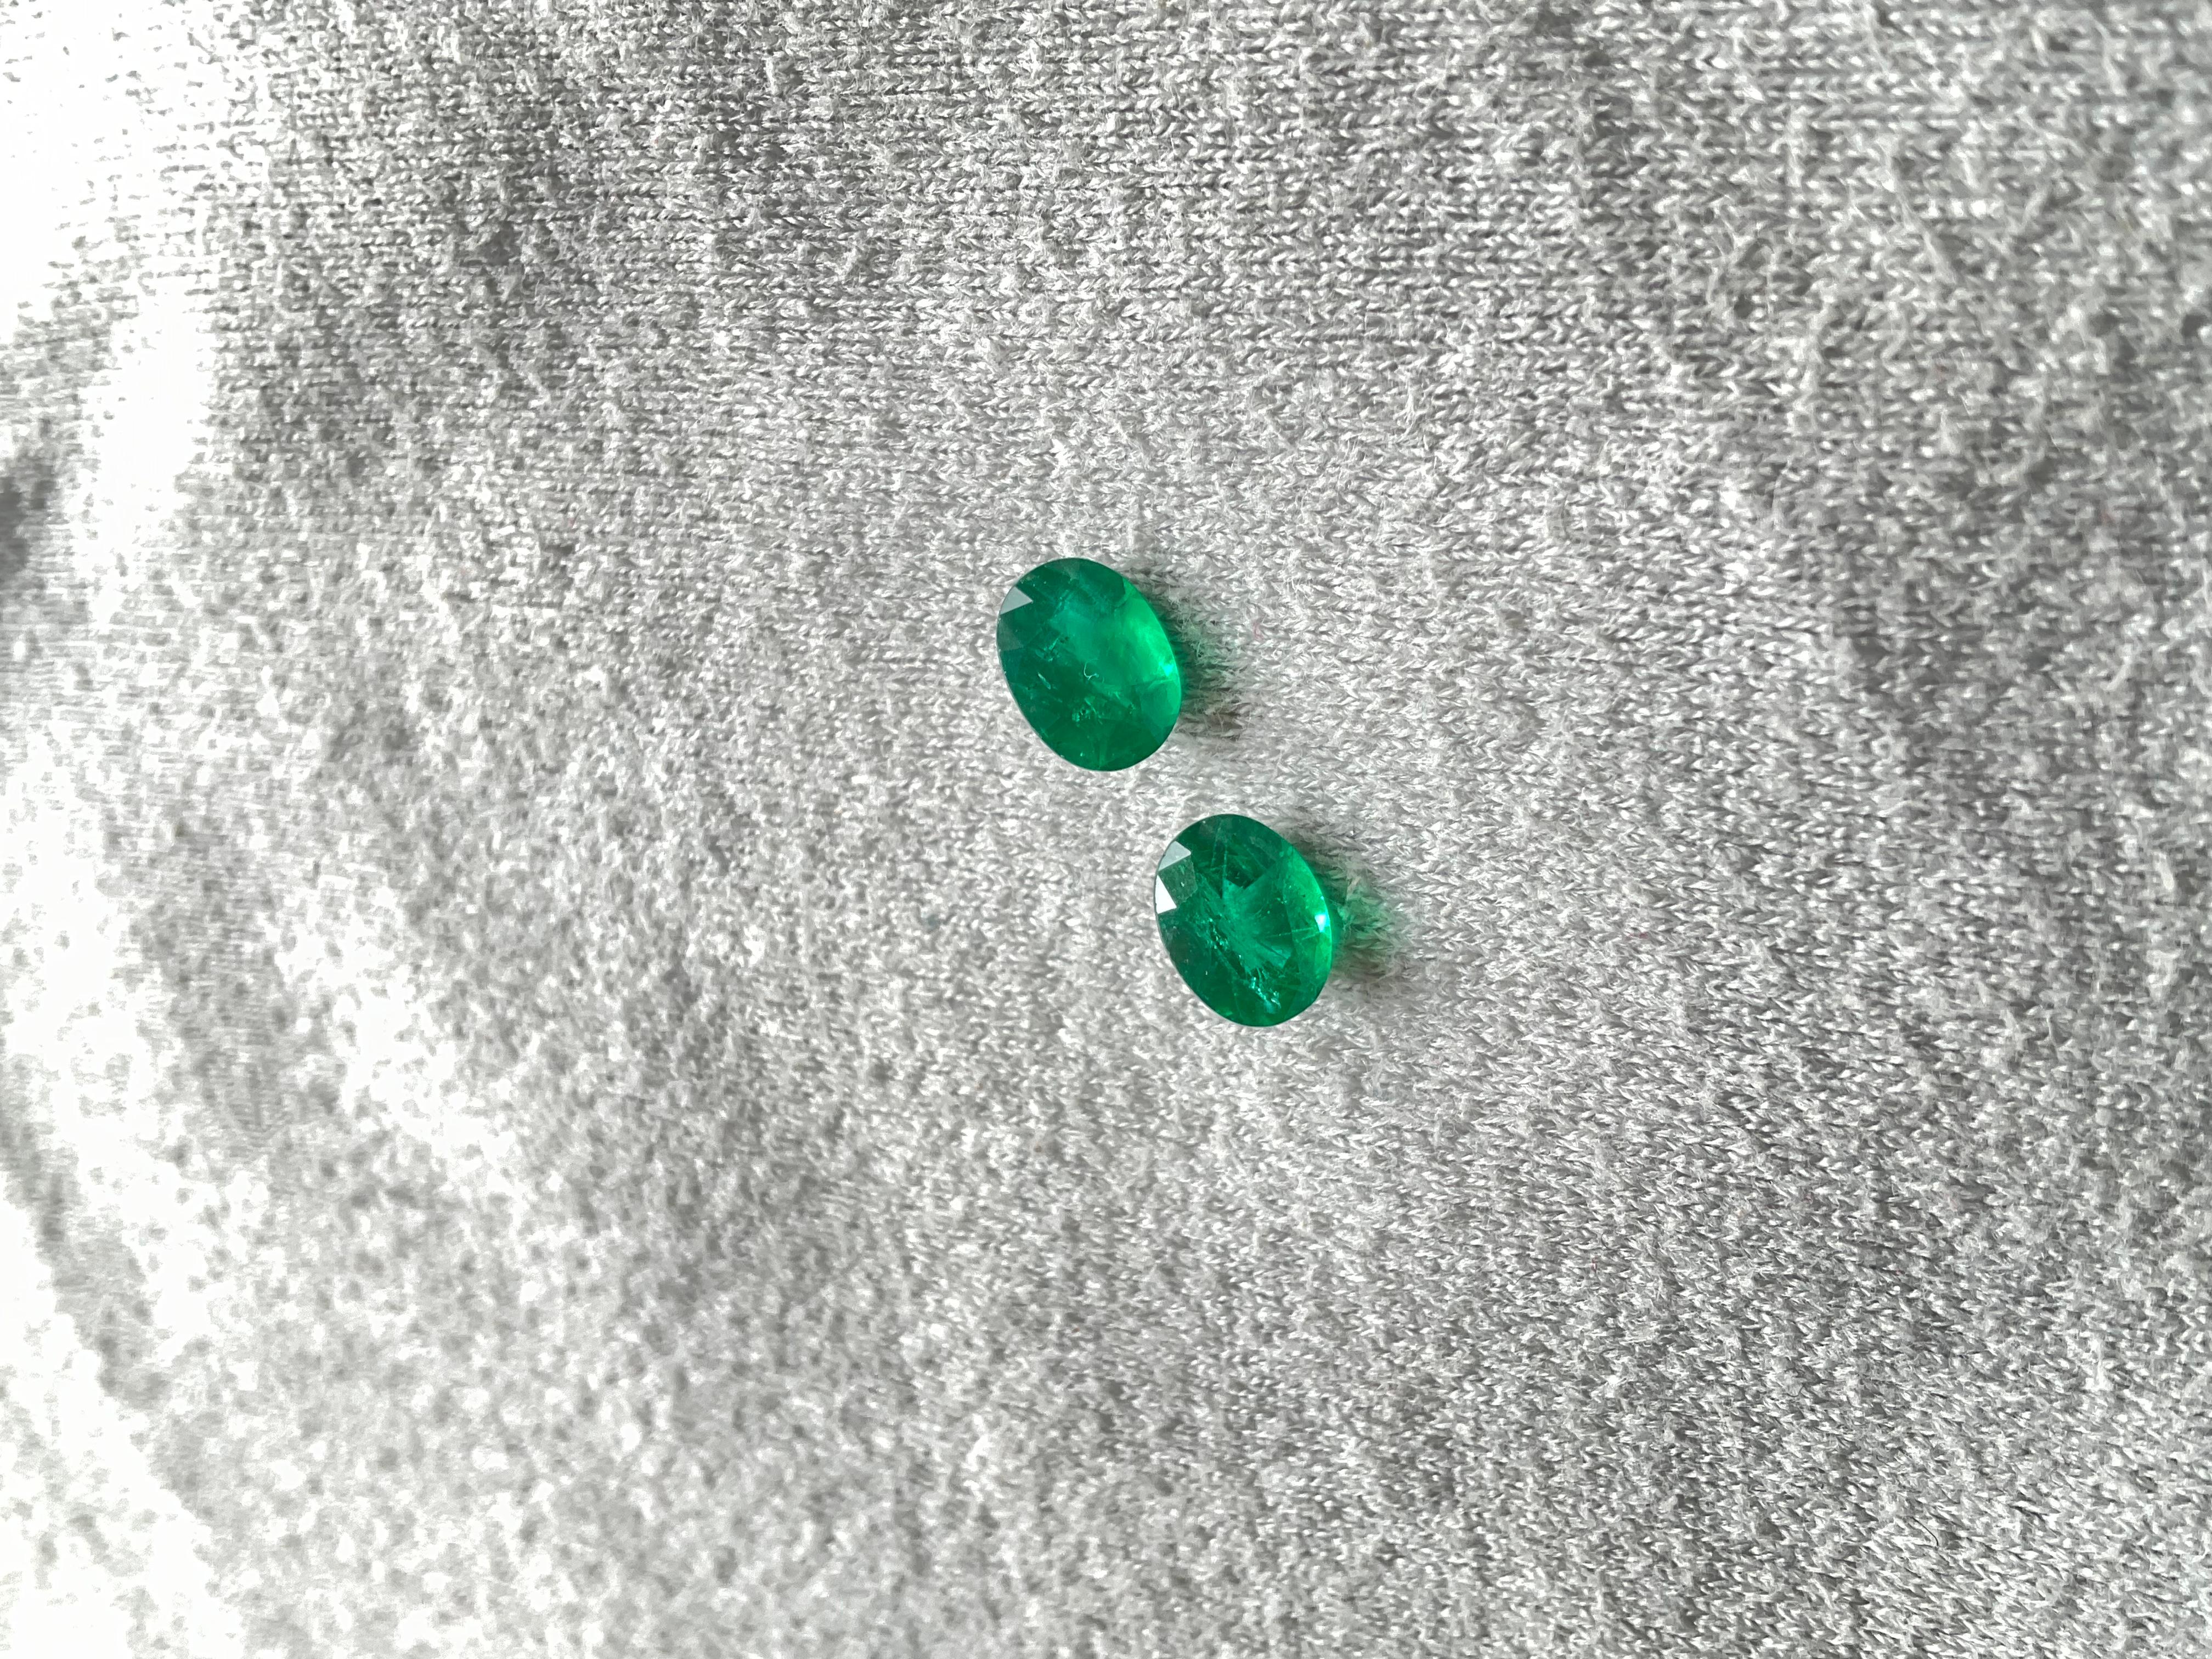 1.98 carats Zambian Emerald Oval pair Cut stone for fine Jewelry Natural Gemstone
Weight: 1.98 Carats
Size: 7x5 MM
Pieces: 2
Shape: Oval